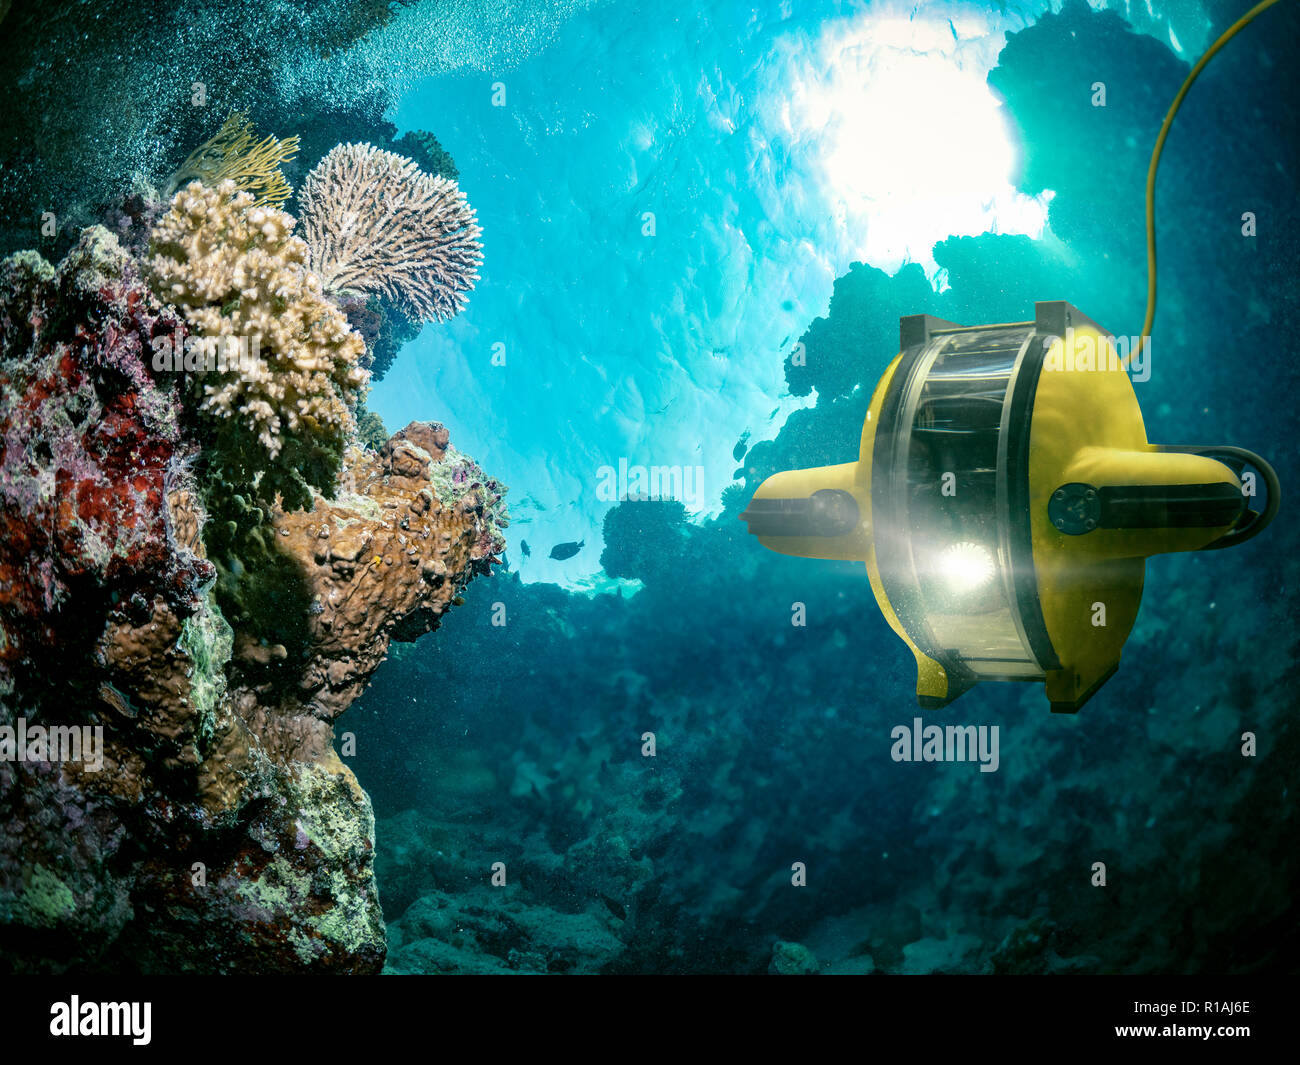 Underwater robot explores the deep sea - This image is an illustration Stock Photo